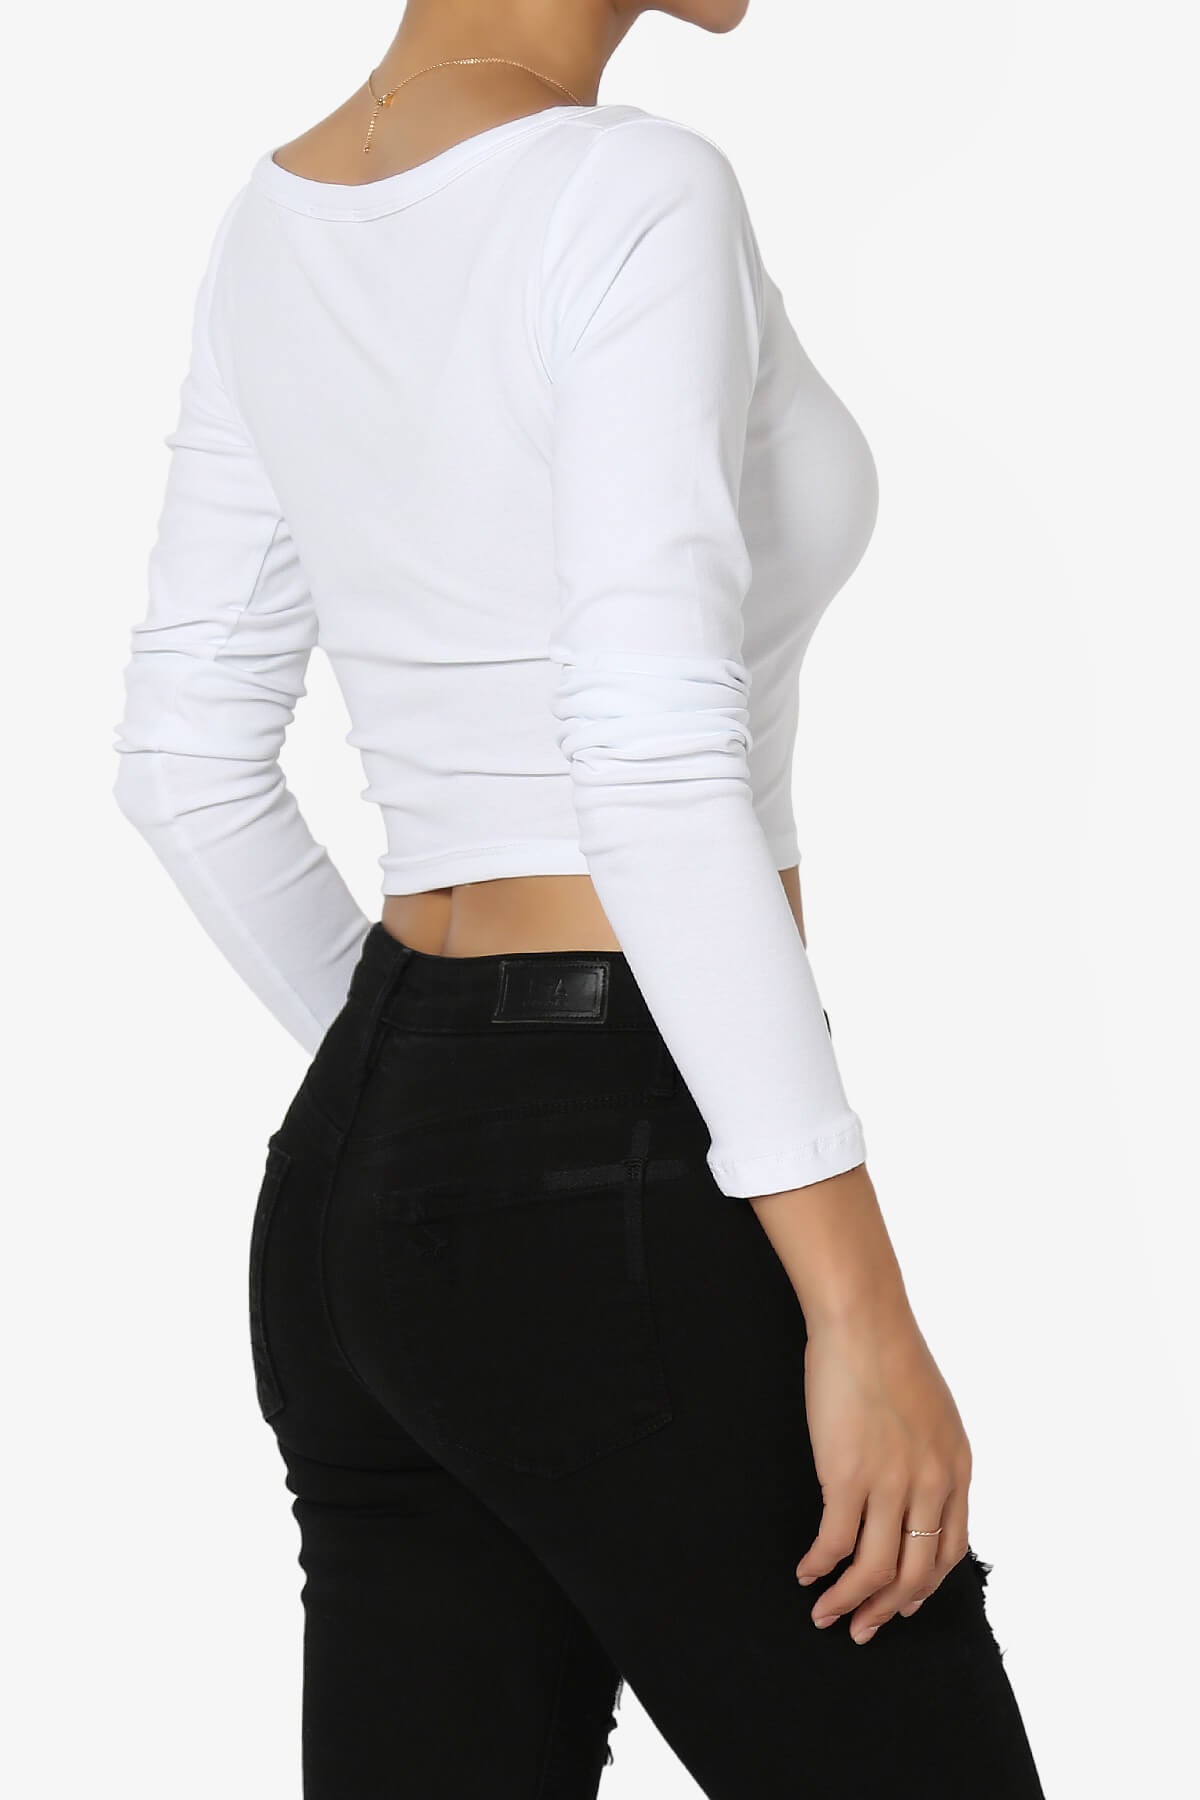 THE BLAZZE 1059 Women's Basic Solid Scoop Neck Slim Fit Full Sleeve Crop  Top for Women (X-Small, White) : : Clothing & Accessories